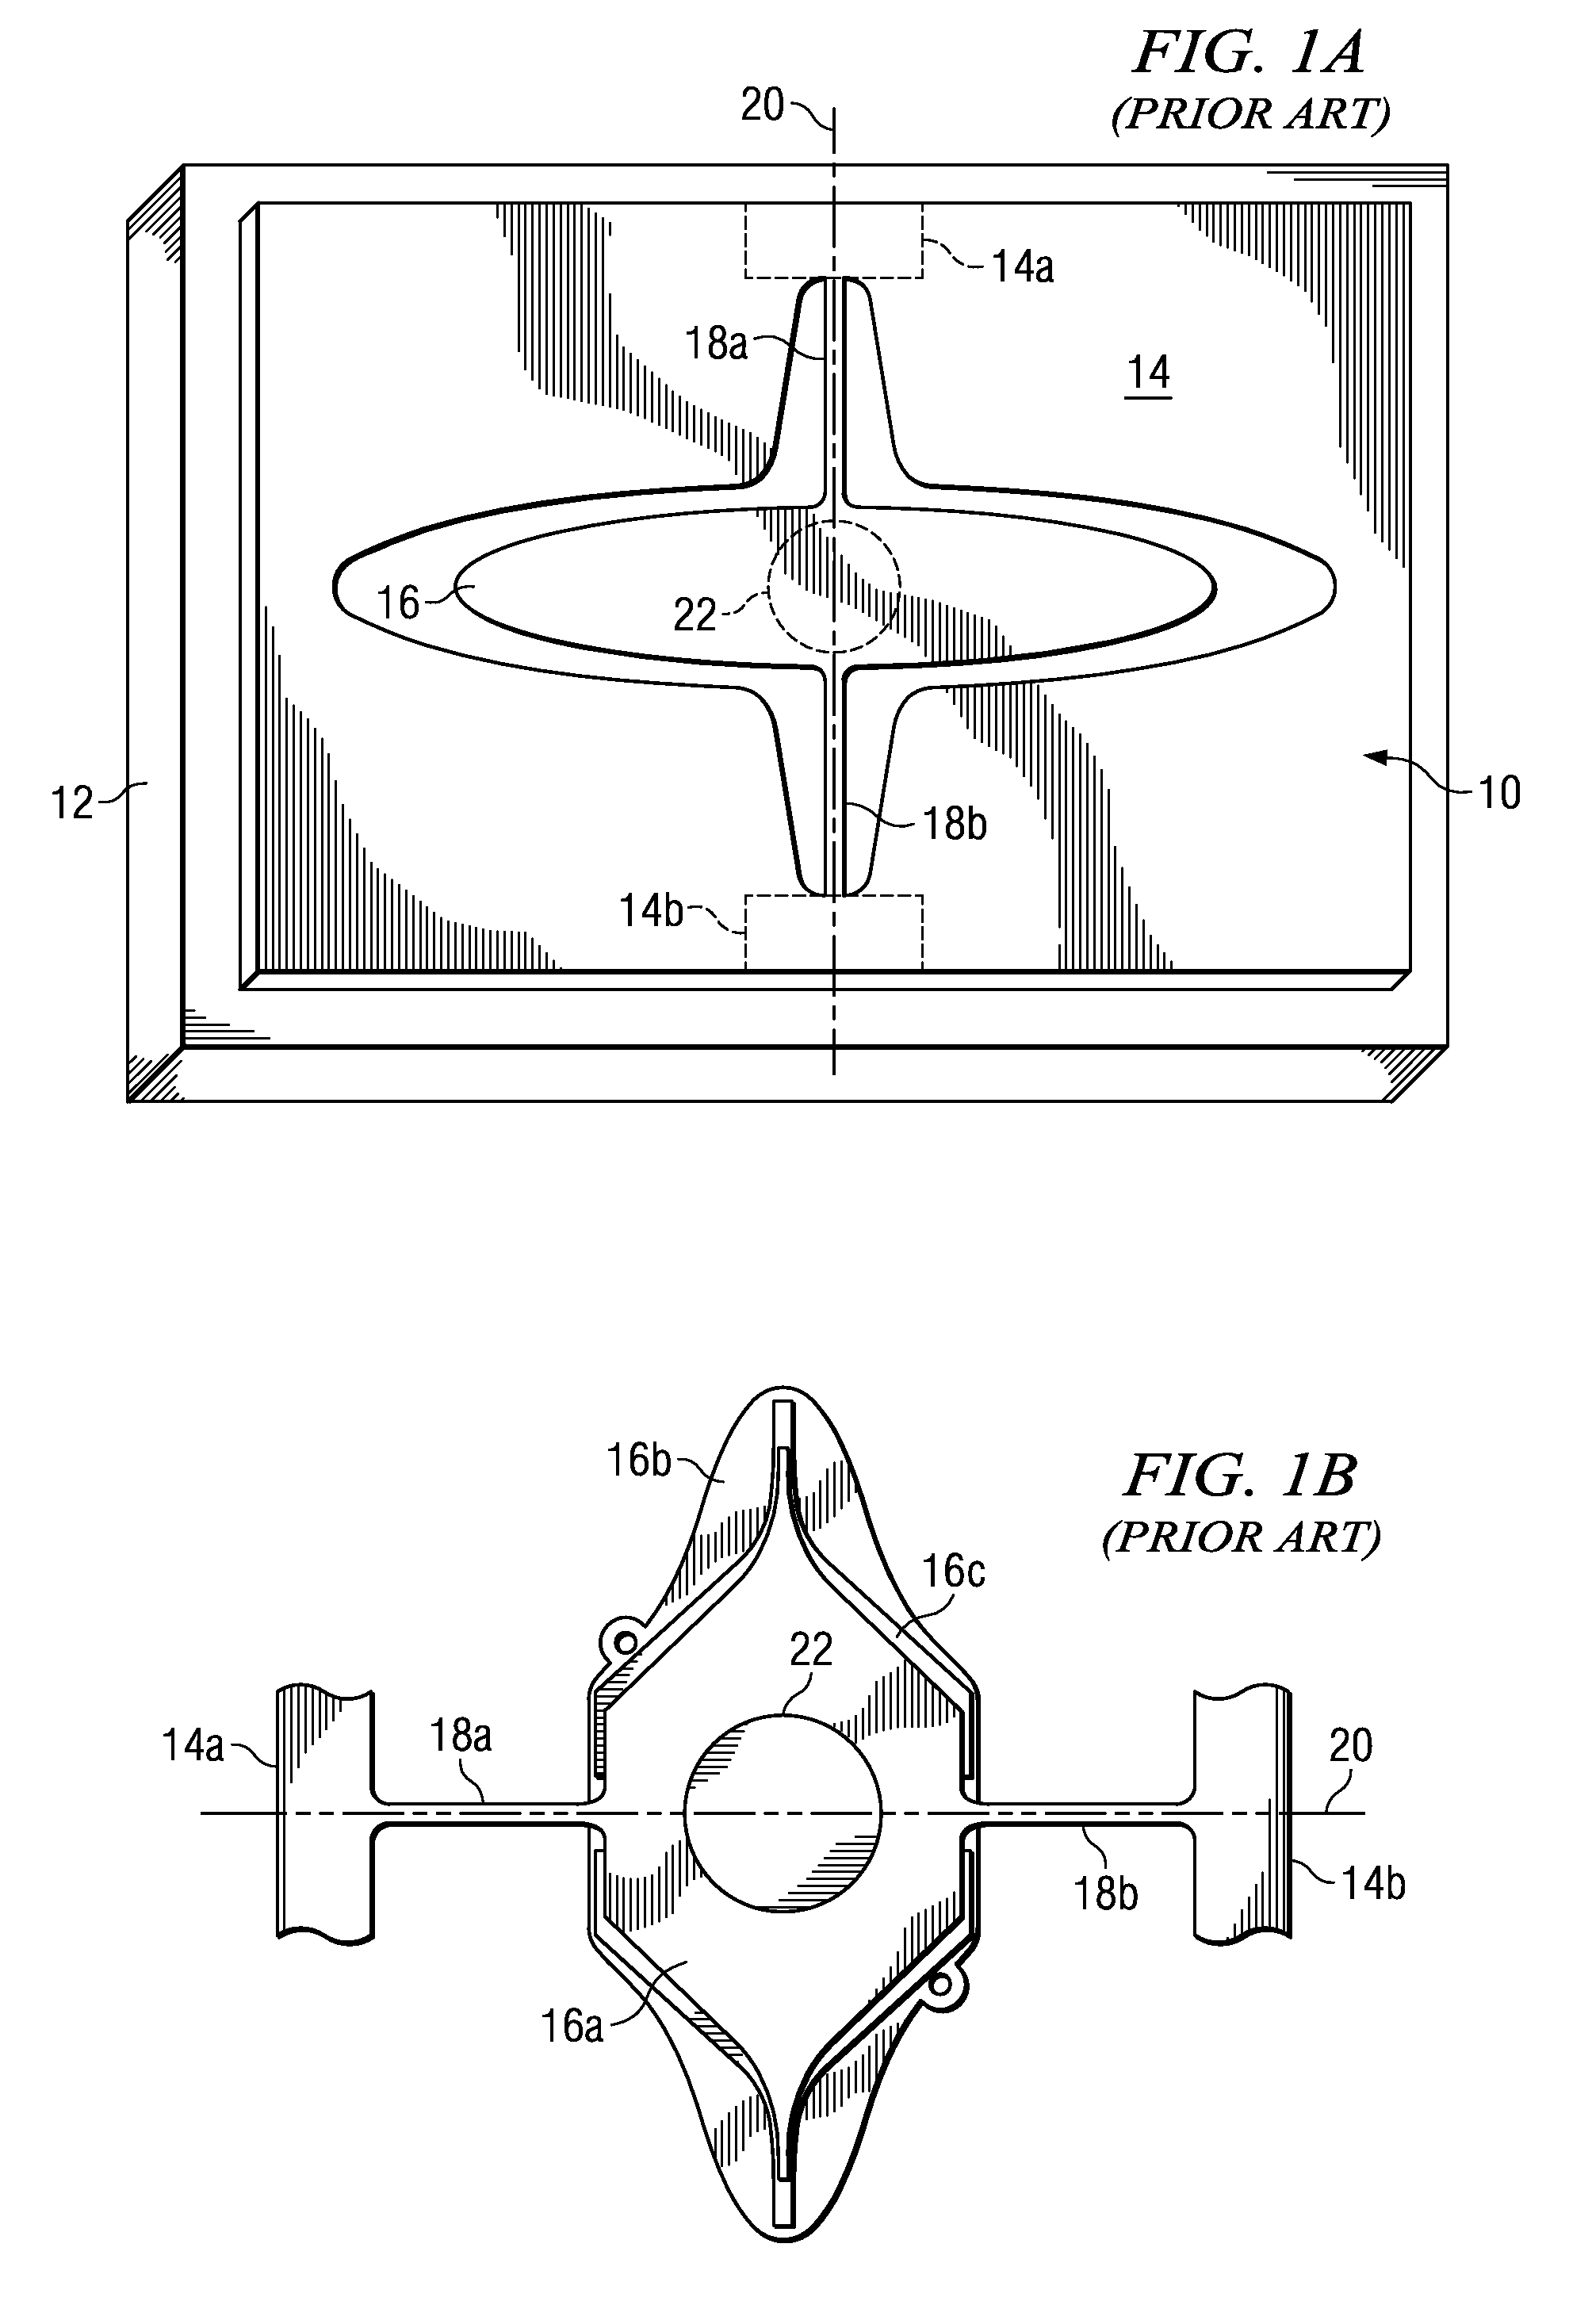 Apparatus and method for adjusting the resonant frequency of an oscillating device